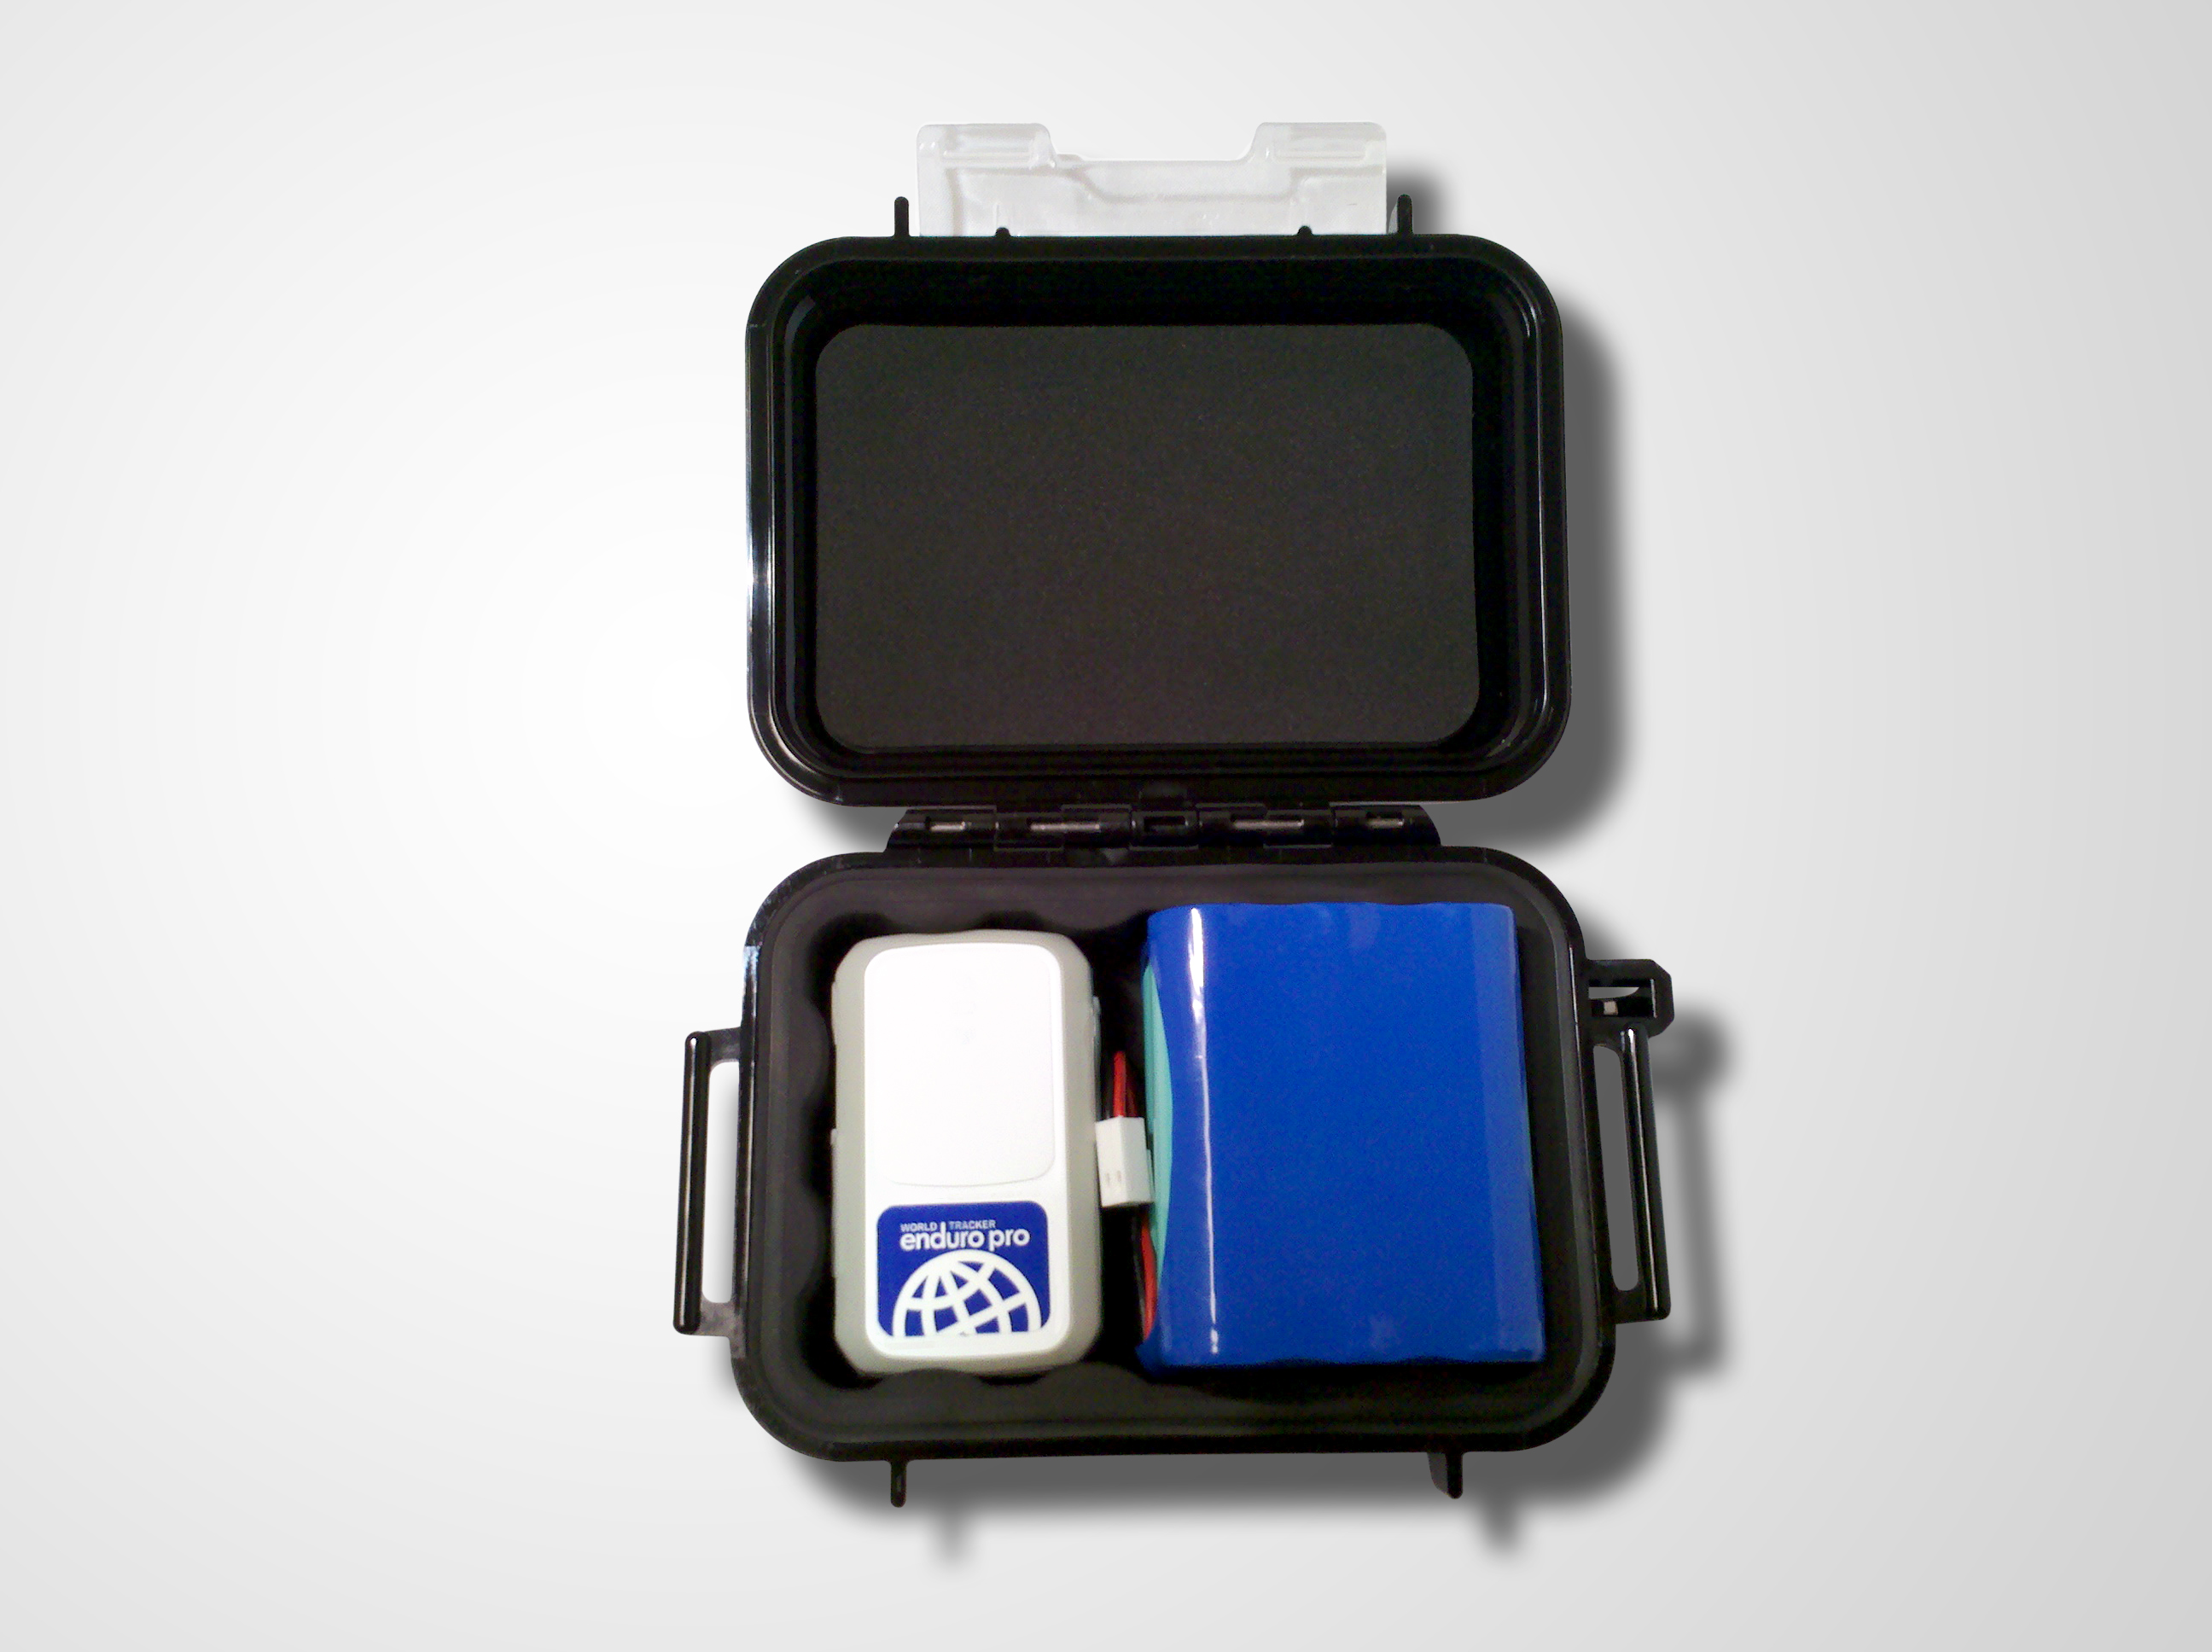 Common GPS tracking device in weatherproof housing with battery pack.